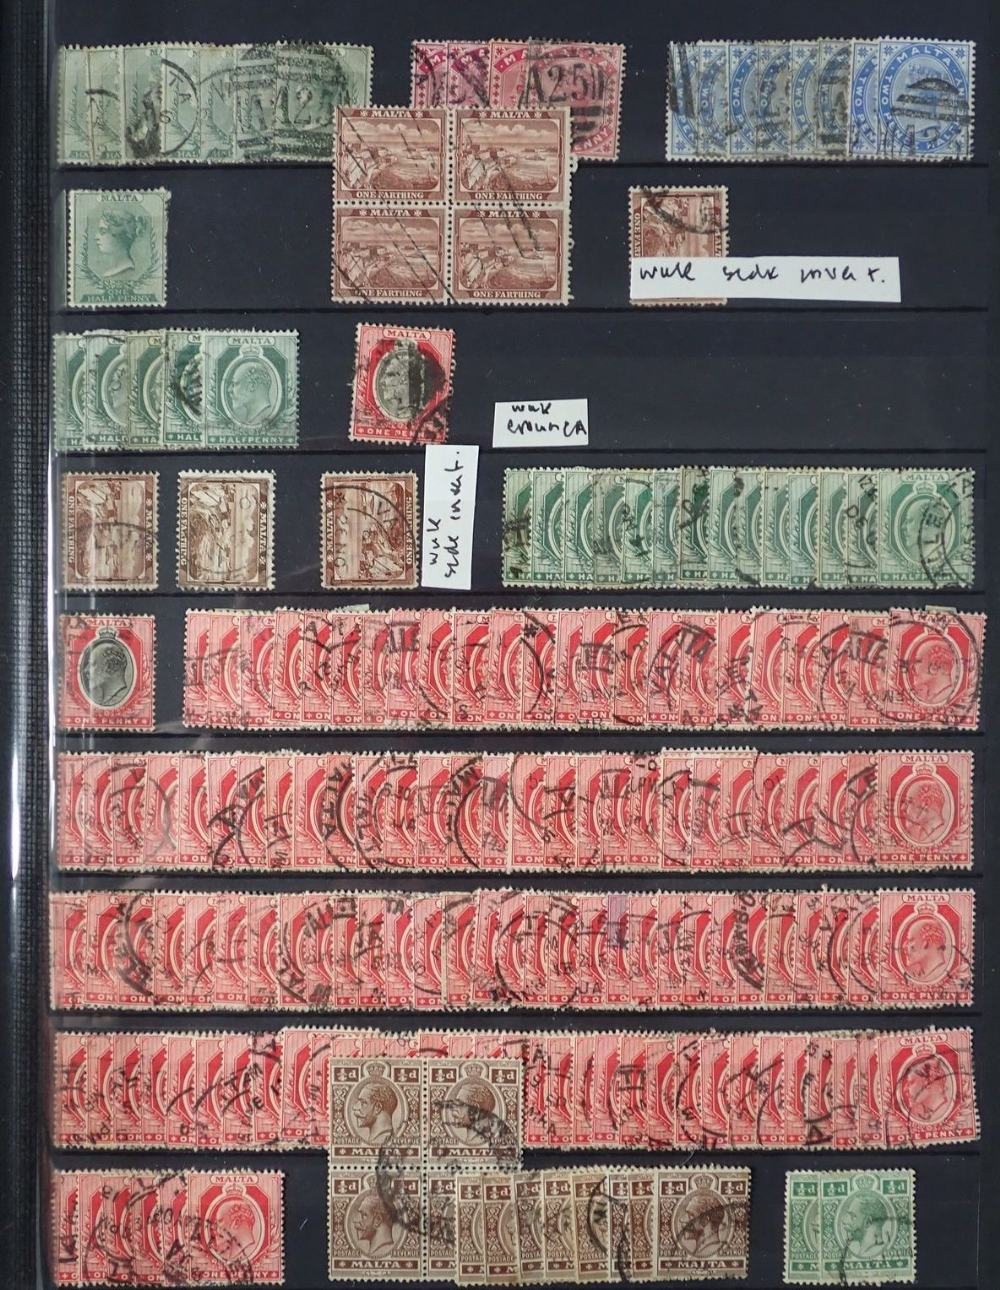 Malta: Sizeable mint & used QV-QEII period collection in large stock-book with most pages full of